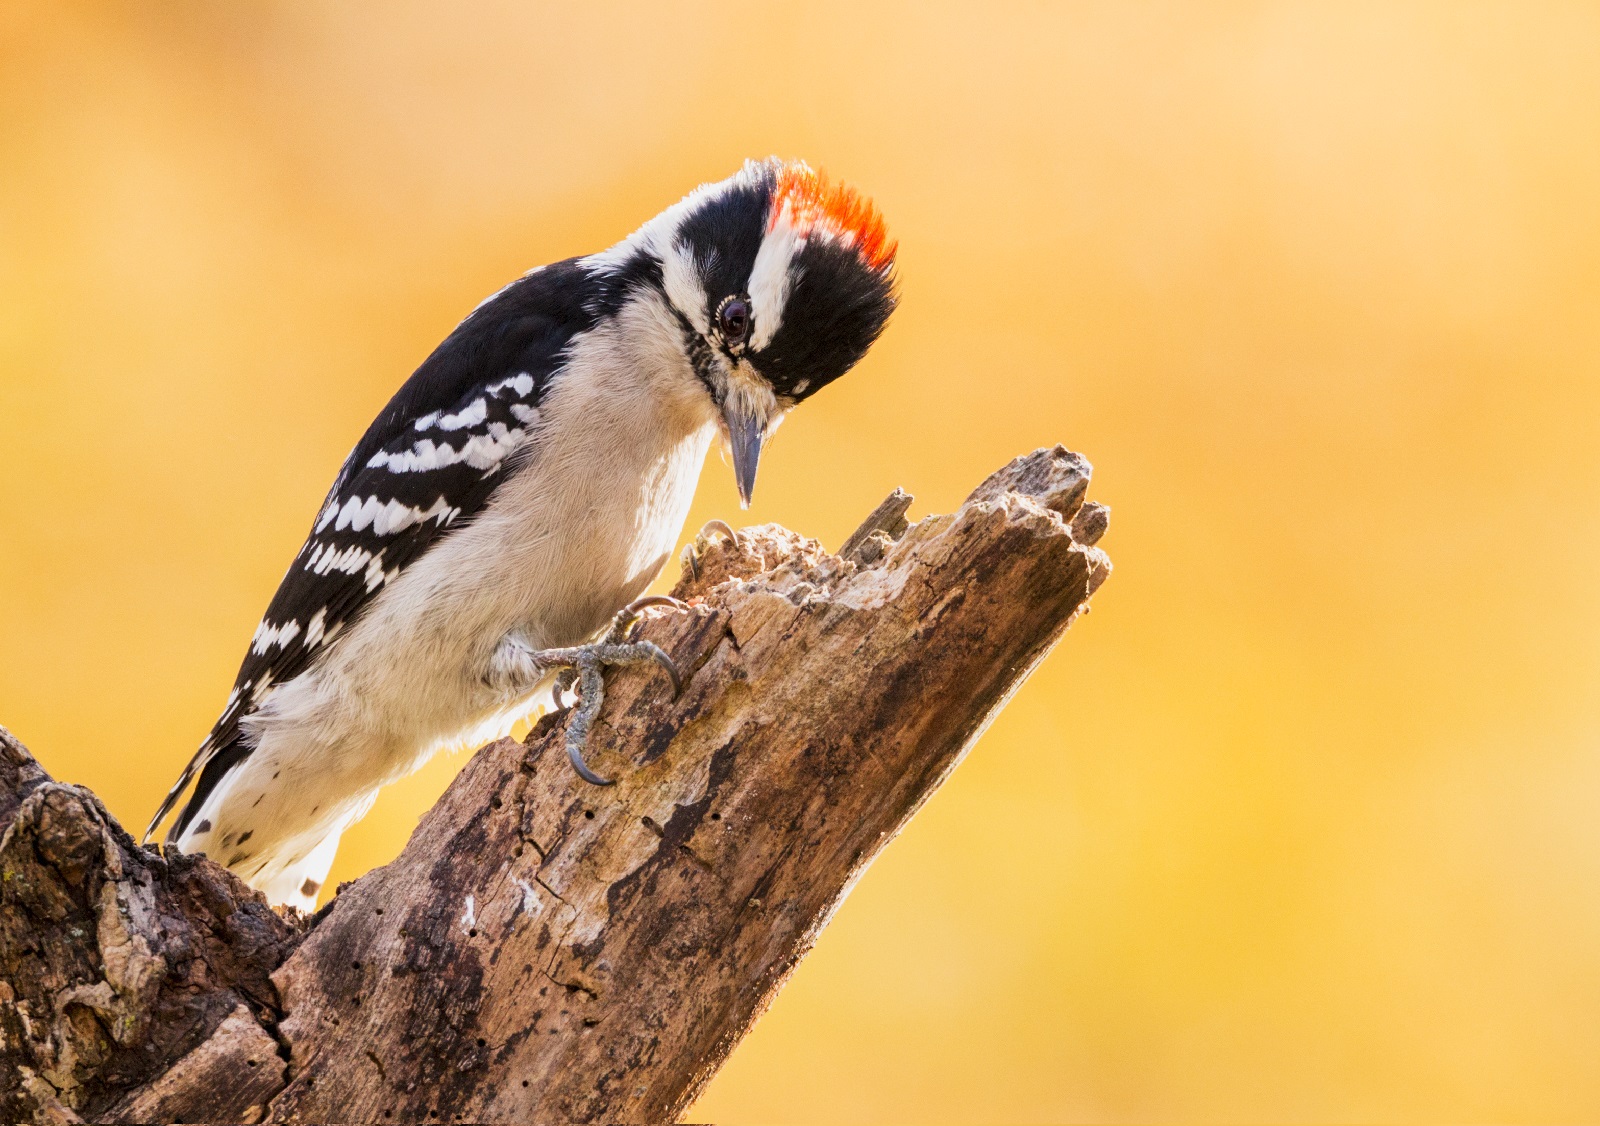 What Do Woodpeckers Eat?